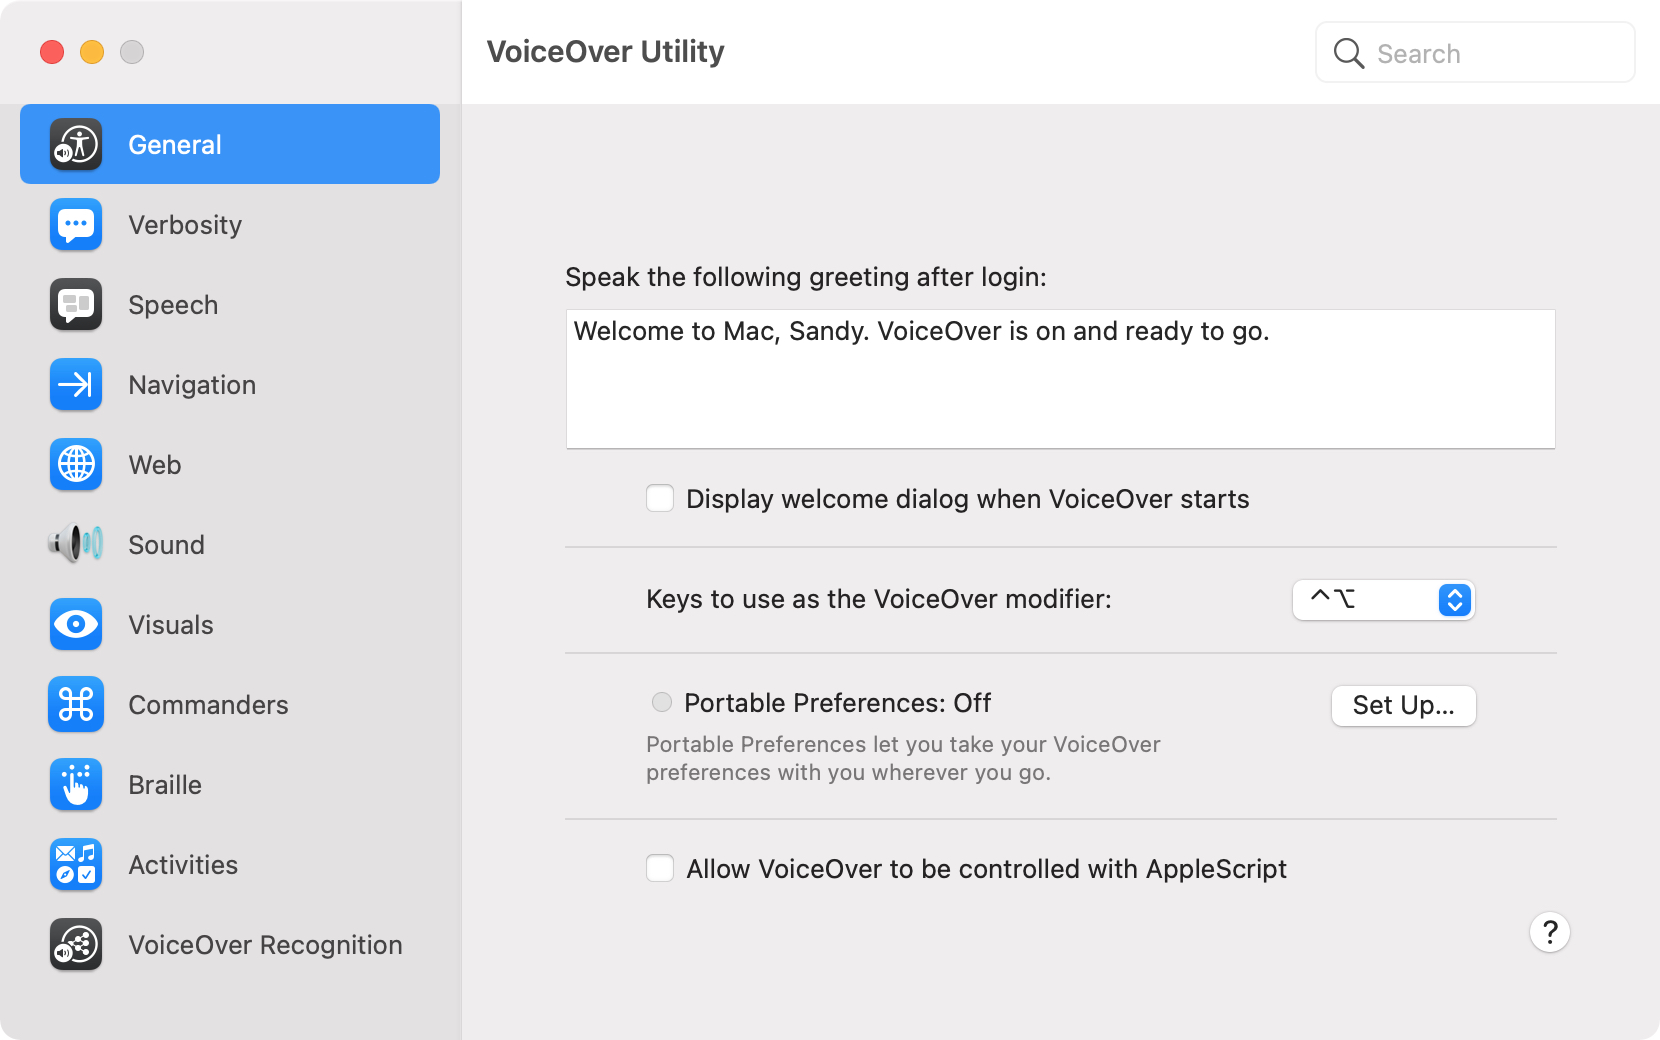 VoiceOver Utility General